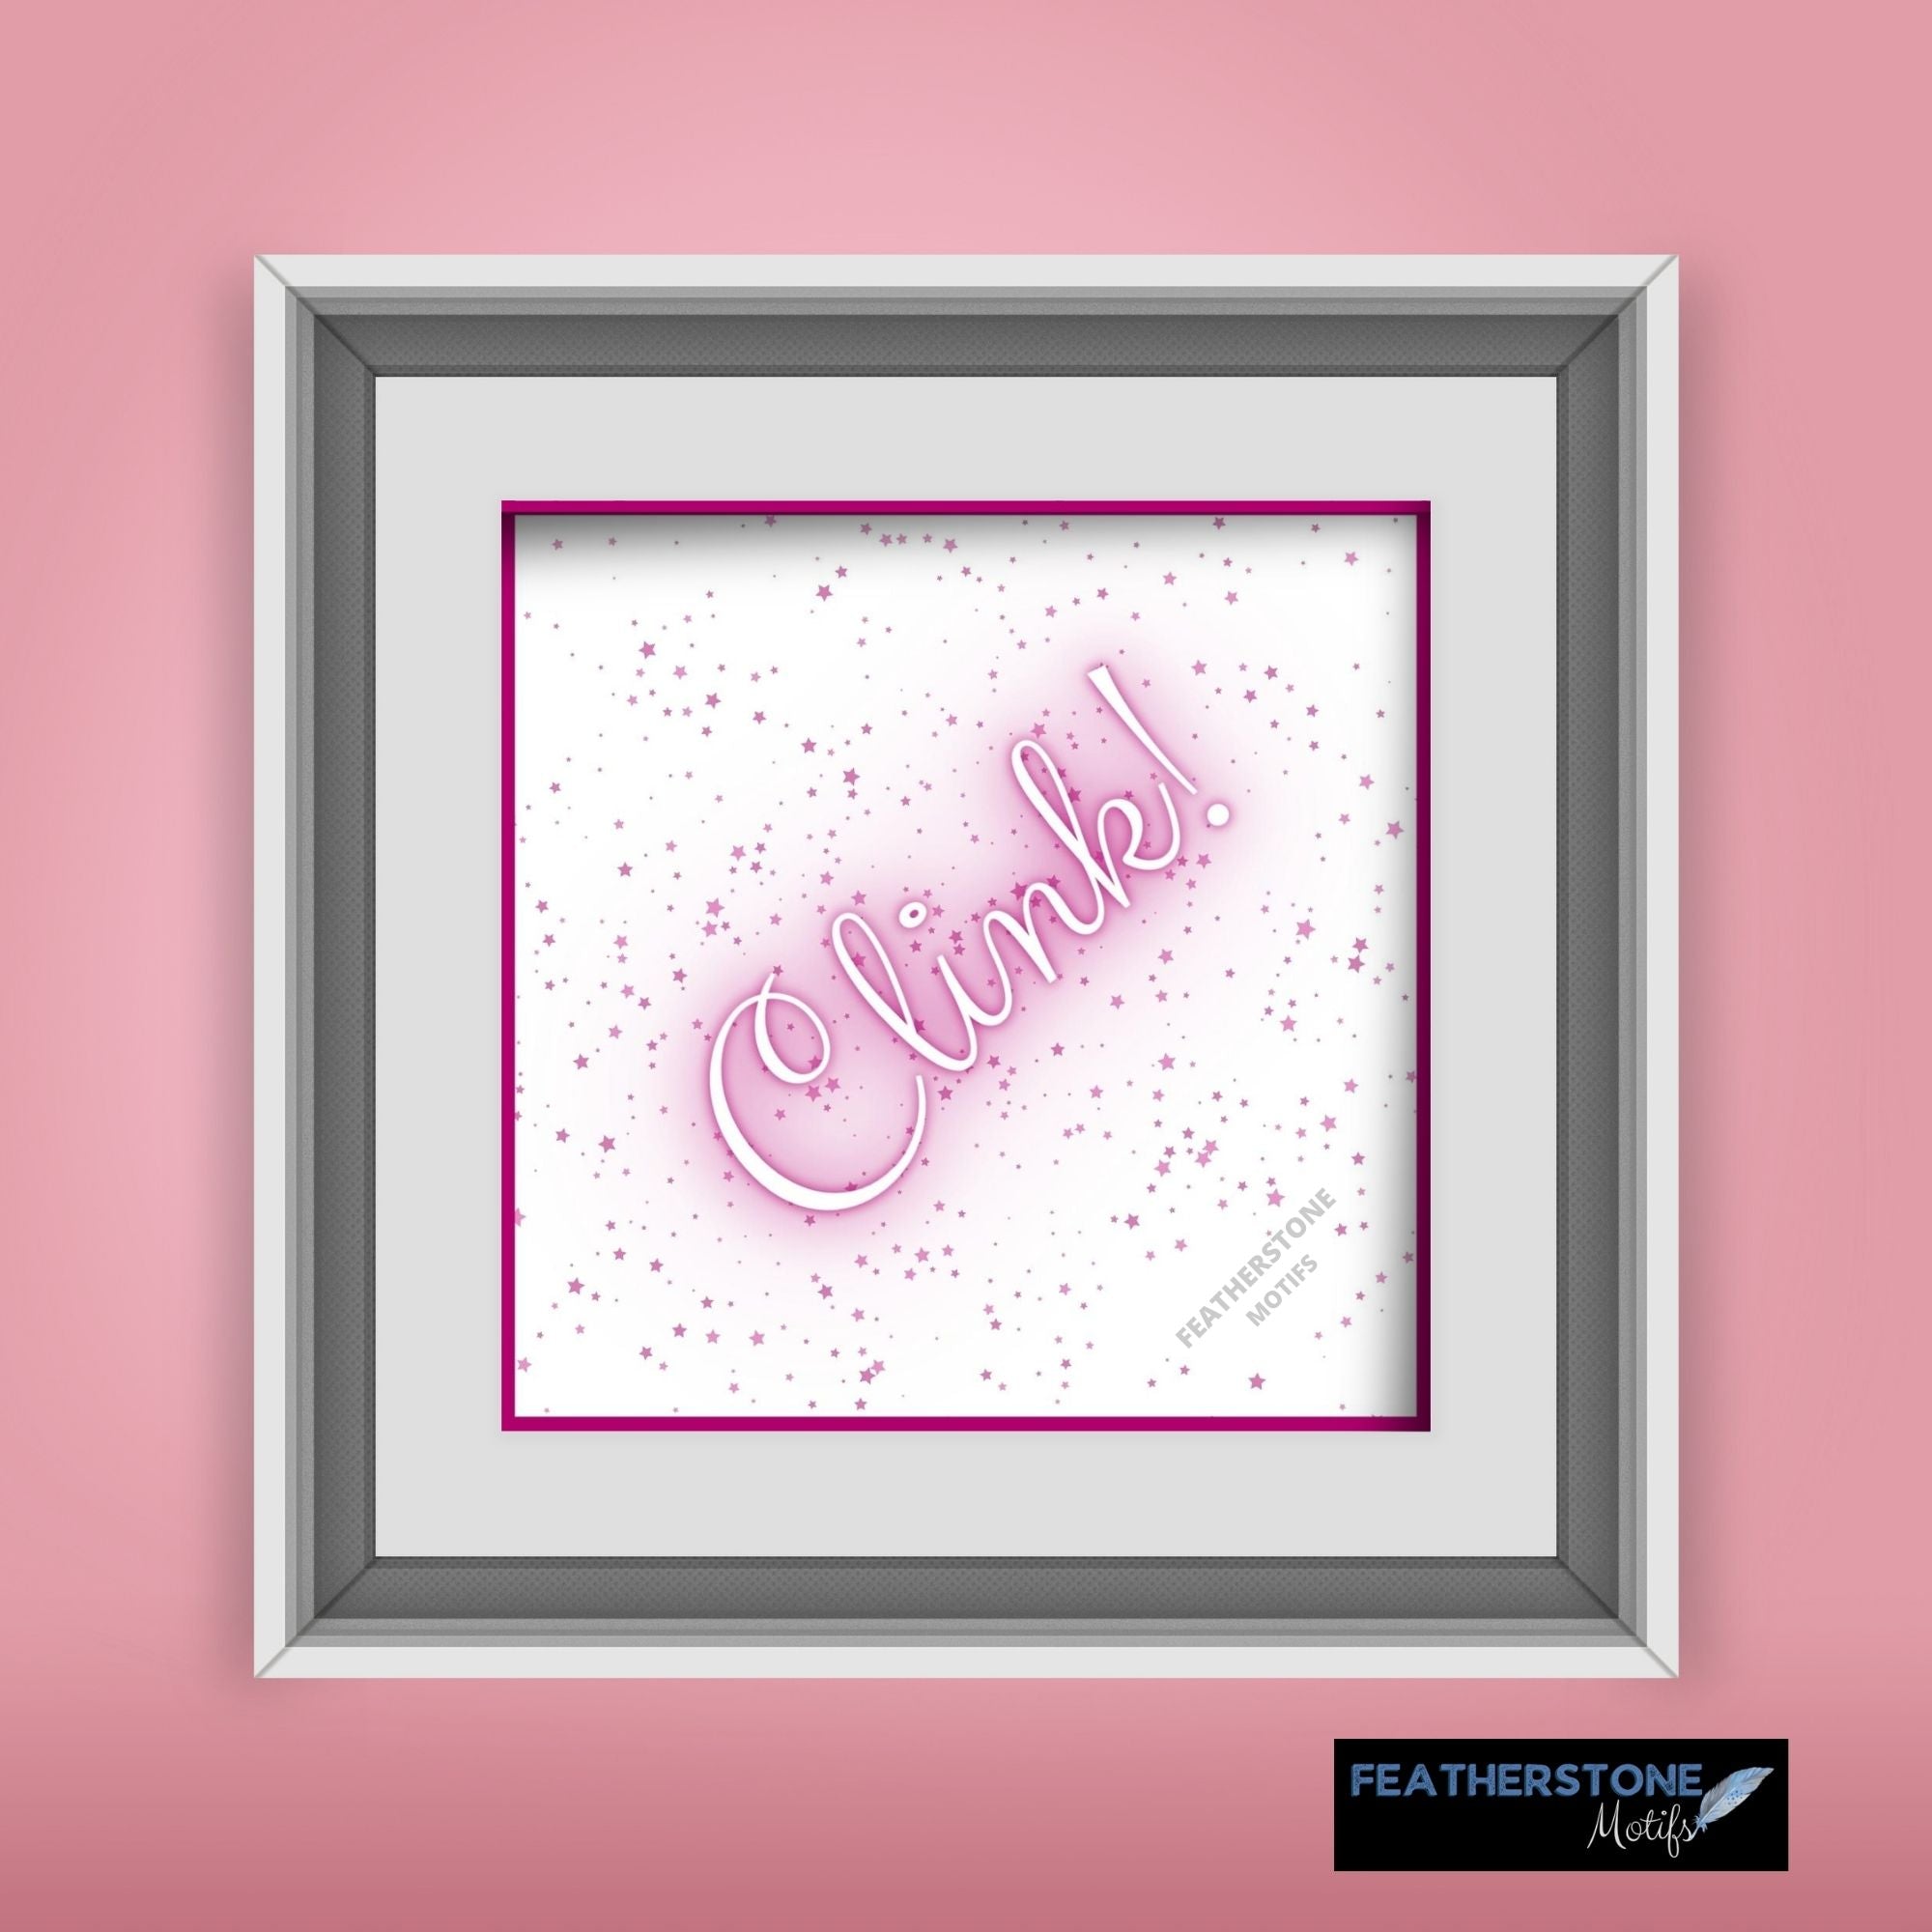 Let's celebrate! This set of 30 digital images are perfect for your next big event, or to add some Sparkle! to every day. Use for craft projects like handmade coasters and greeting cards, or frame and hang them on the wall.